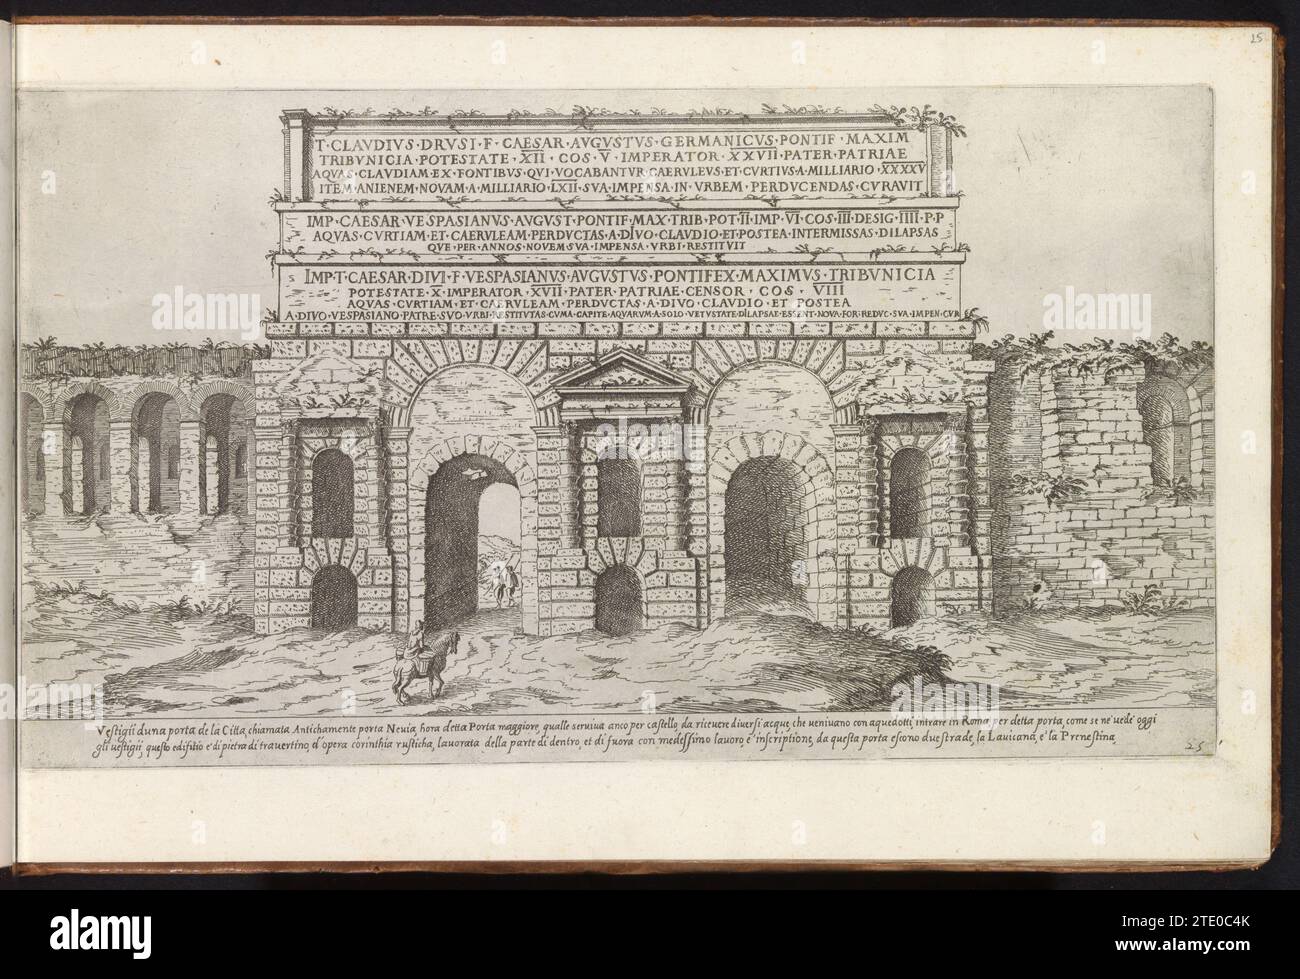 Porta Maggiore te Rome, Etienne Dupérac, 1575 View of the Porta Maggiore in the Aurelian Wall in Rome. Caption in Italian. Print is part of an album. maker: Italypublisher: RomeVaticaanstadItaly paper engraving / etching  Major door. Aureliaanse Muur View of the Porta Maggiore in the Aurelian Wall in Rome. Caption in Italian. Print is part of an album. maker: Italypublisher: RomeVaticaanstadItaly paper engraving / etching  Major door. Aureliaanse Muur Stock Photo